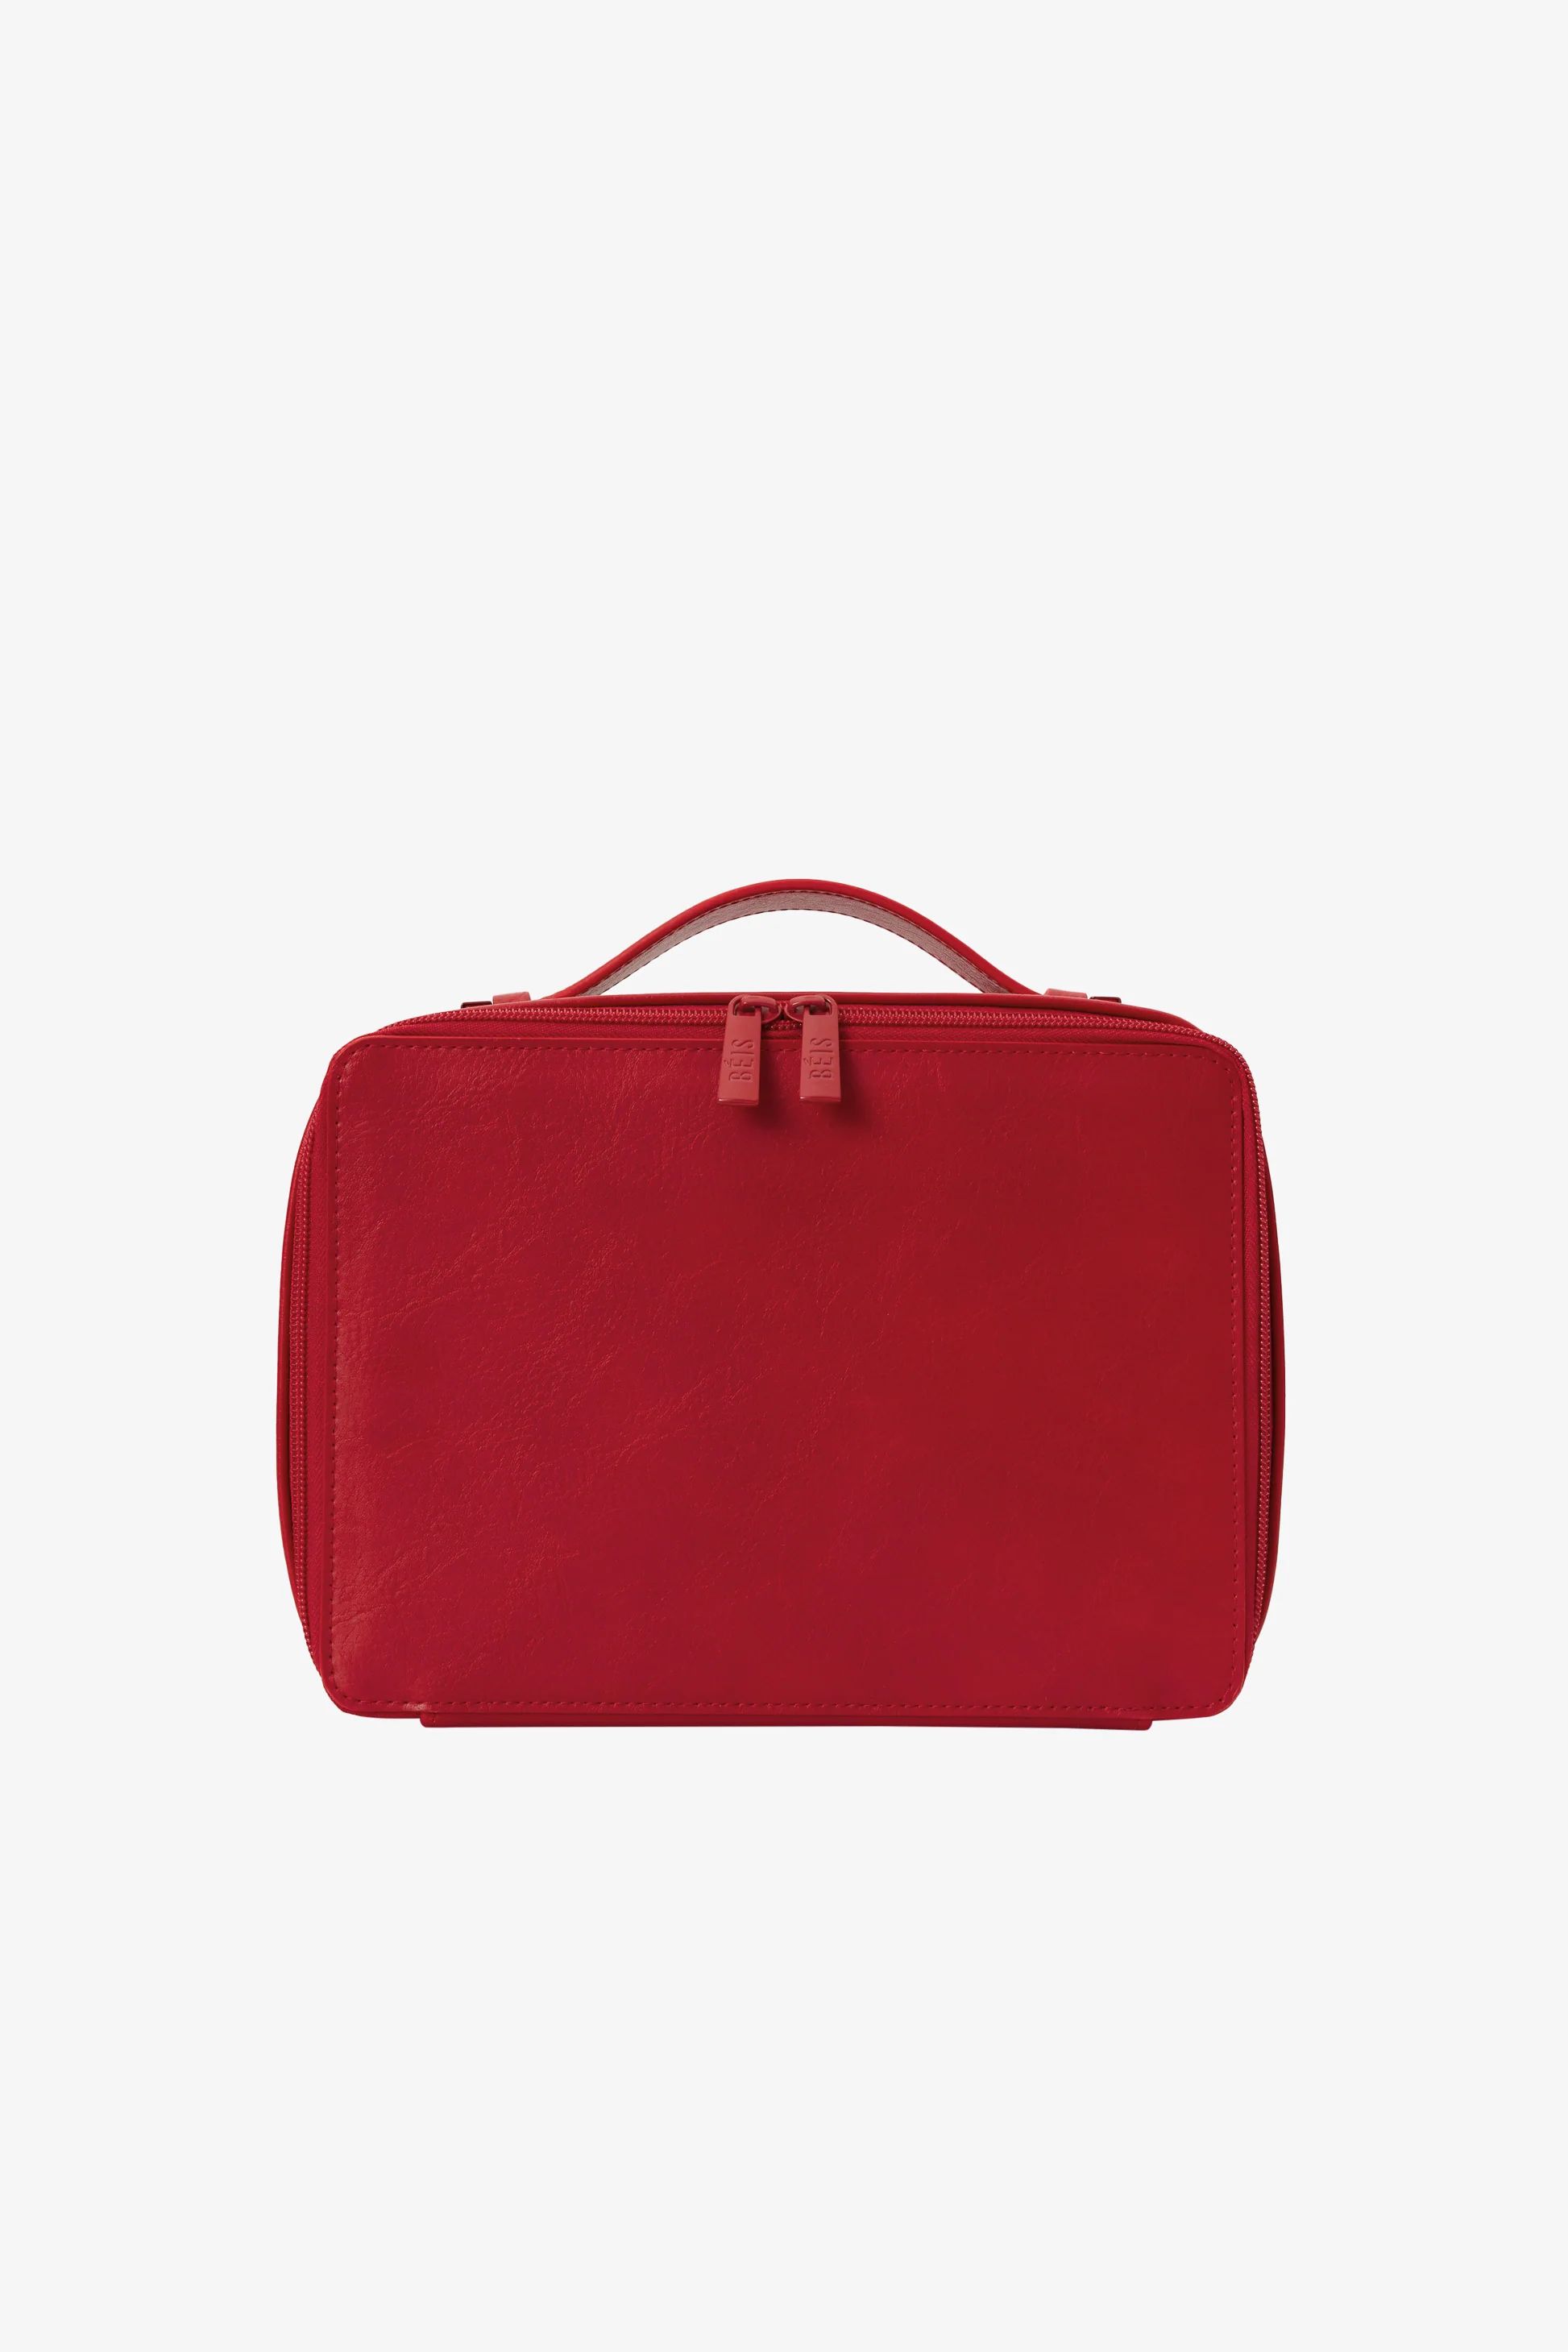 The Cosmetic Case in Text Me Red | BÉIS Travel